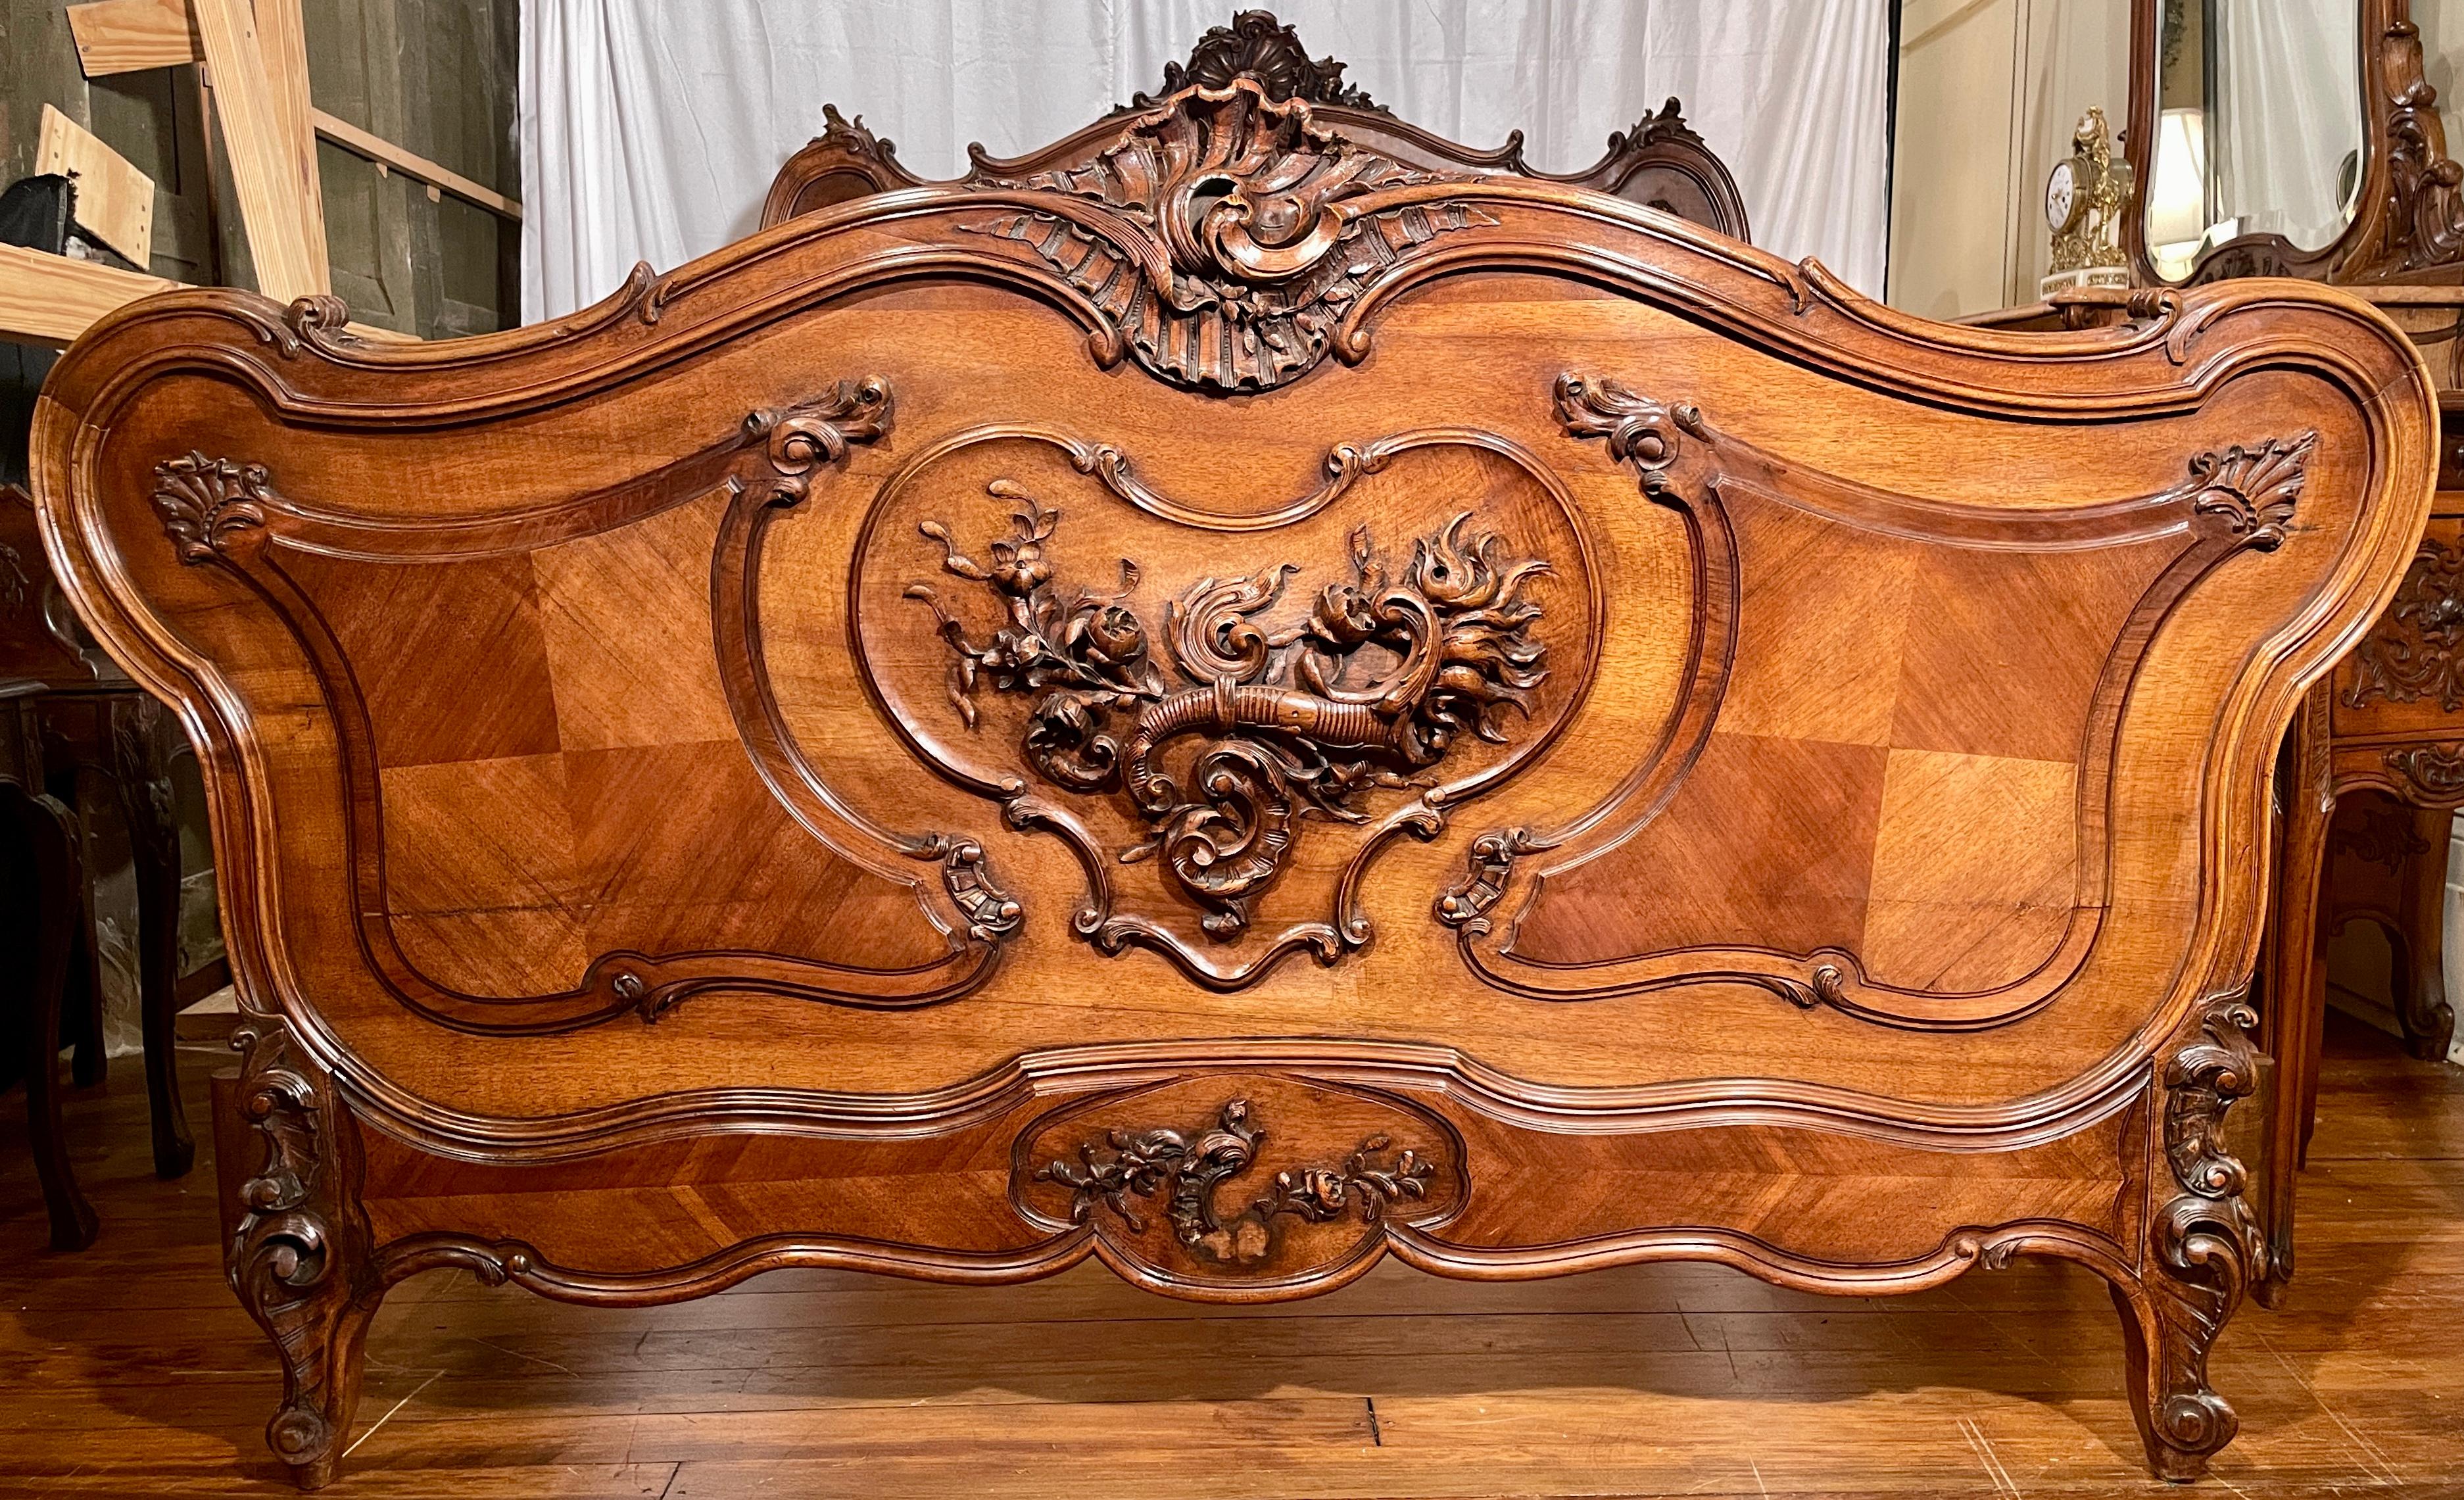 19th Century Antique French Carved Walnut Bed and Night Table, circa 1875-1895